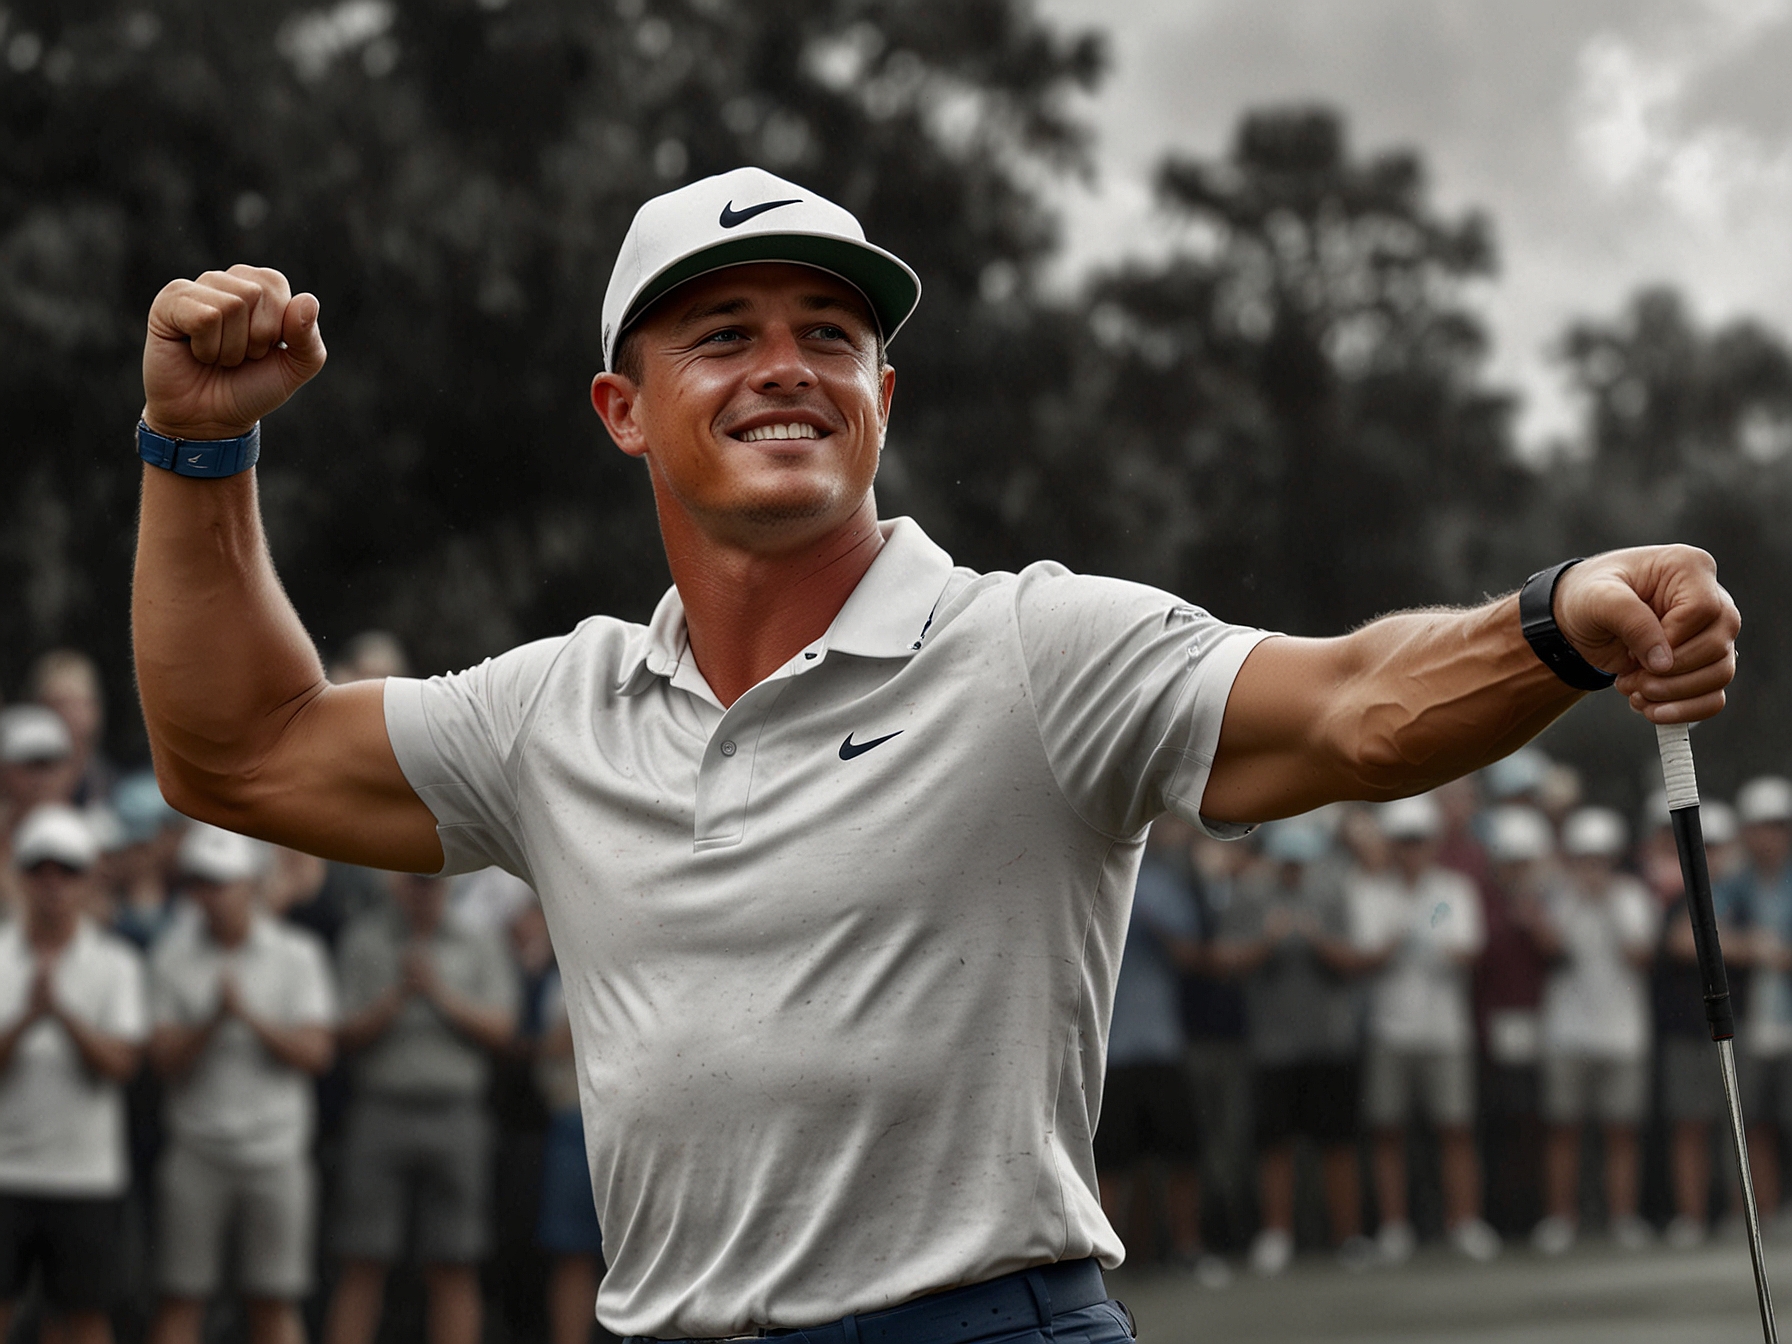 Bryson DeChambeau celebrates his victory with a powerful fist pump, his golf club in hand, epitomizing his resilience and precision that led to winning the US Open.